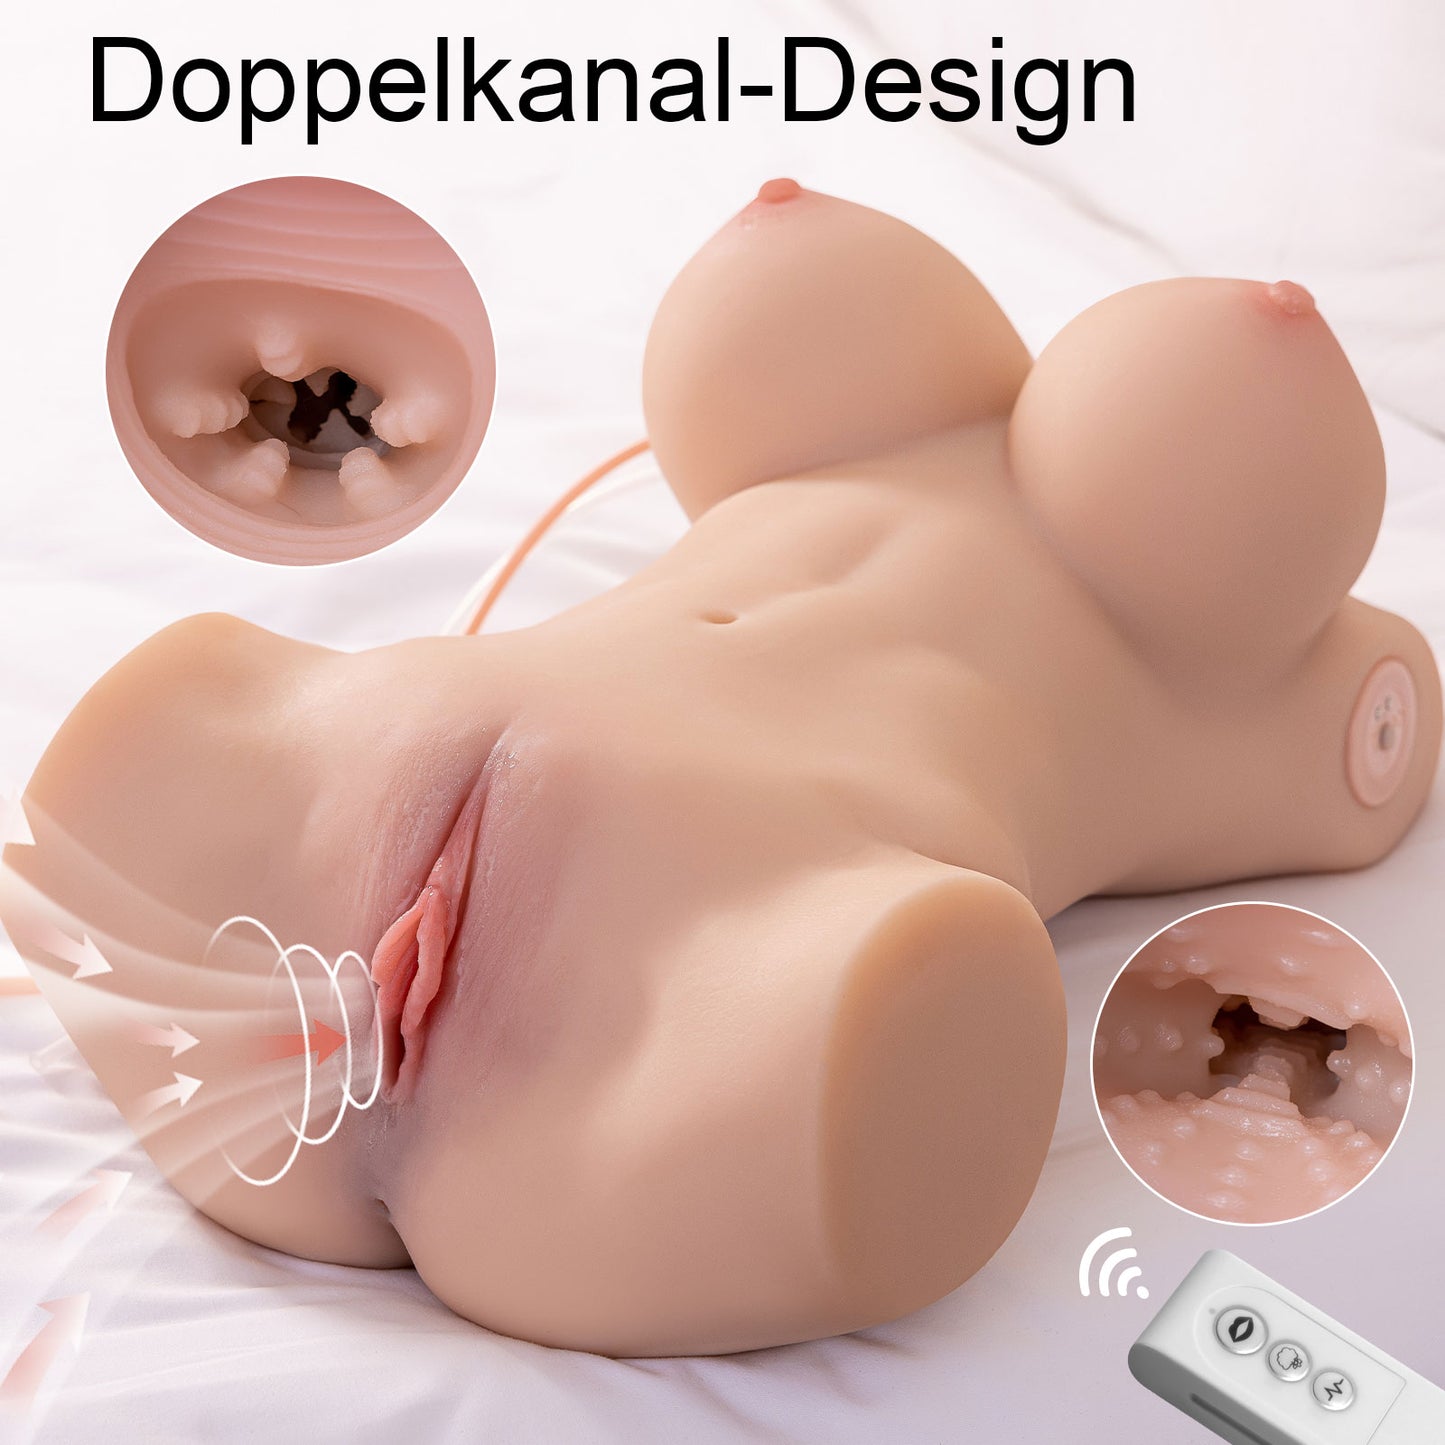 Laura suck and vibrate doll 6.8KG